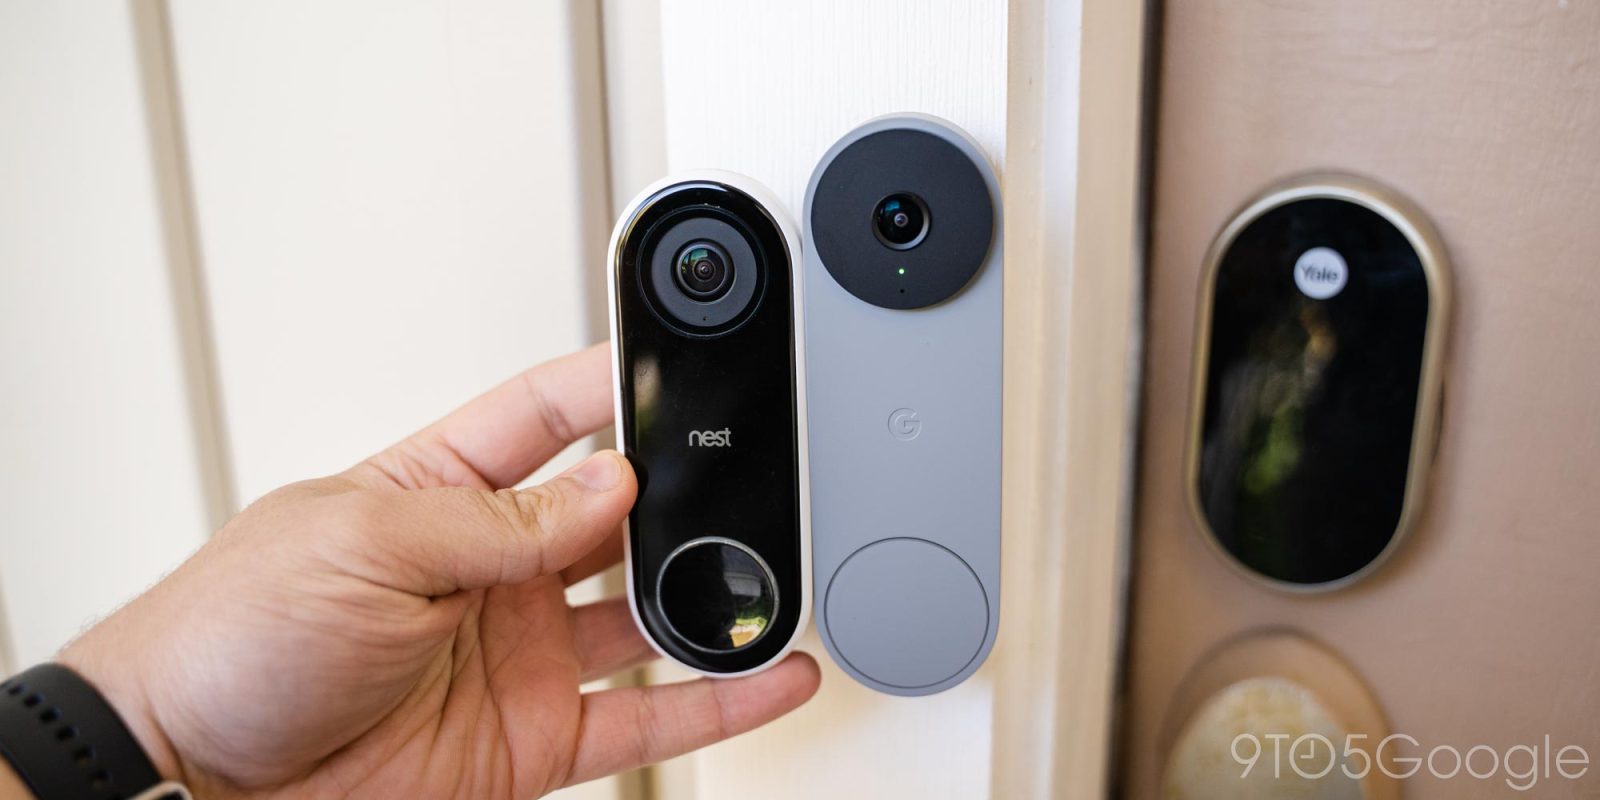 Say hello to Nest Cam